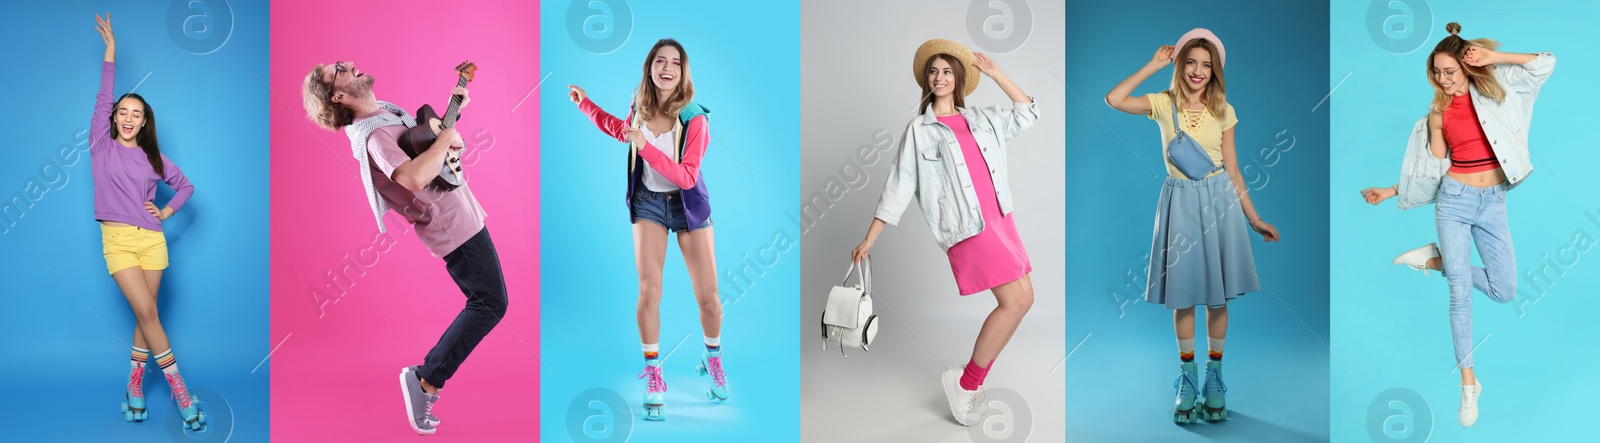 Image of Collage with photos of people wearing trendy clothes on different color backgrounds